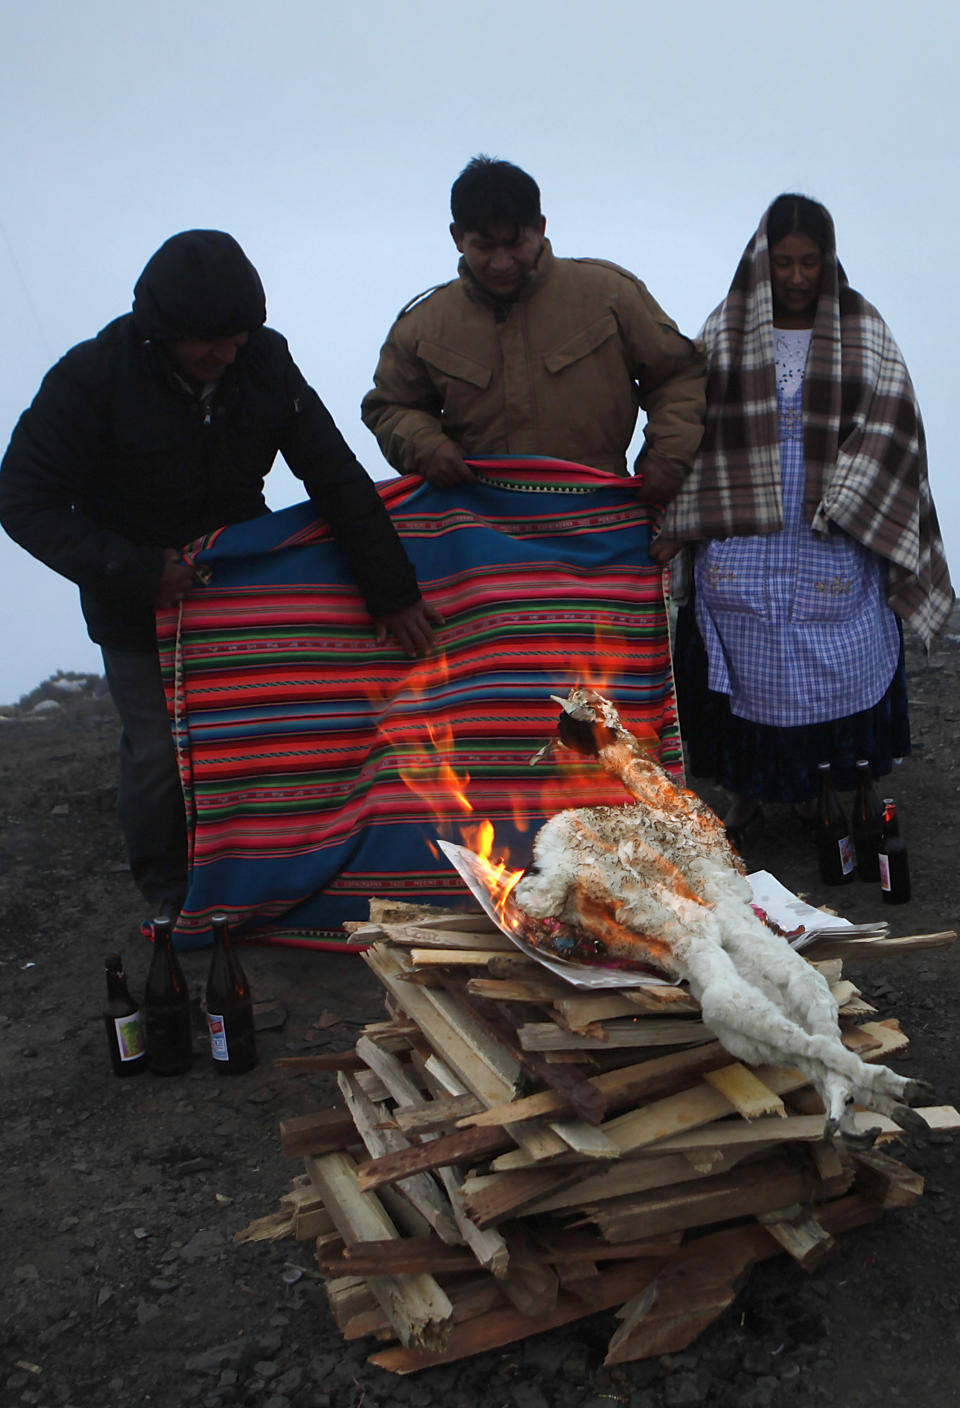 In this Aug. 15, 2012 photo, people burn a dead baby llama as an offering to the "Pachamama," or Mother Earth, on El Cumbre mountain, considered sacred, on the outskirts of La Paz, Bolivia.  During the month of August, people gather on sacred mountains to make offerings and ask for wealth to Mother Earth.  According to local agrarian tradition, Mother Earth awakes hungry and thirsty in August and needs offerings of food and drink in order for her to be fertile and yield abundant crops. (AP Photo/Juan Karita)